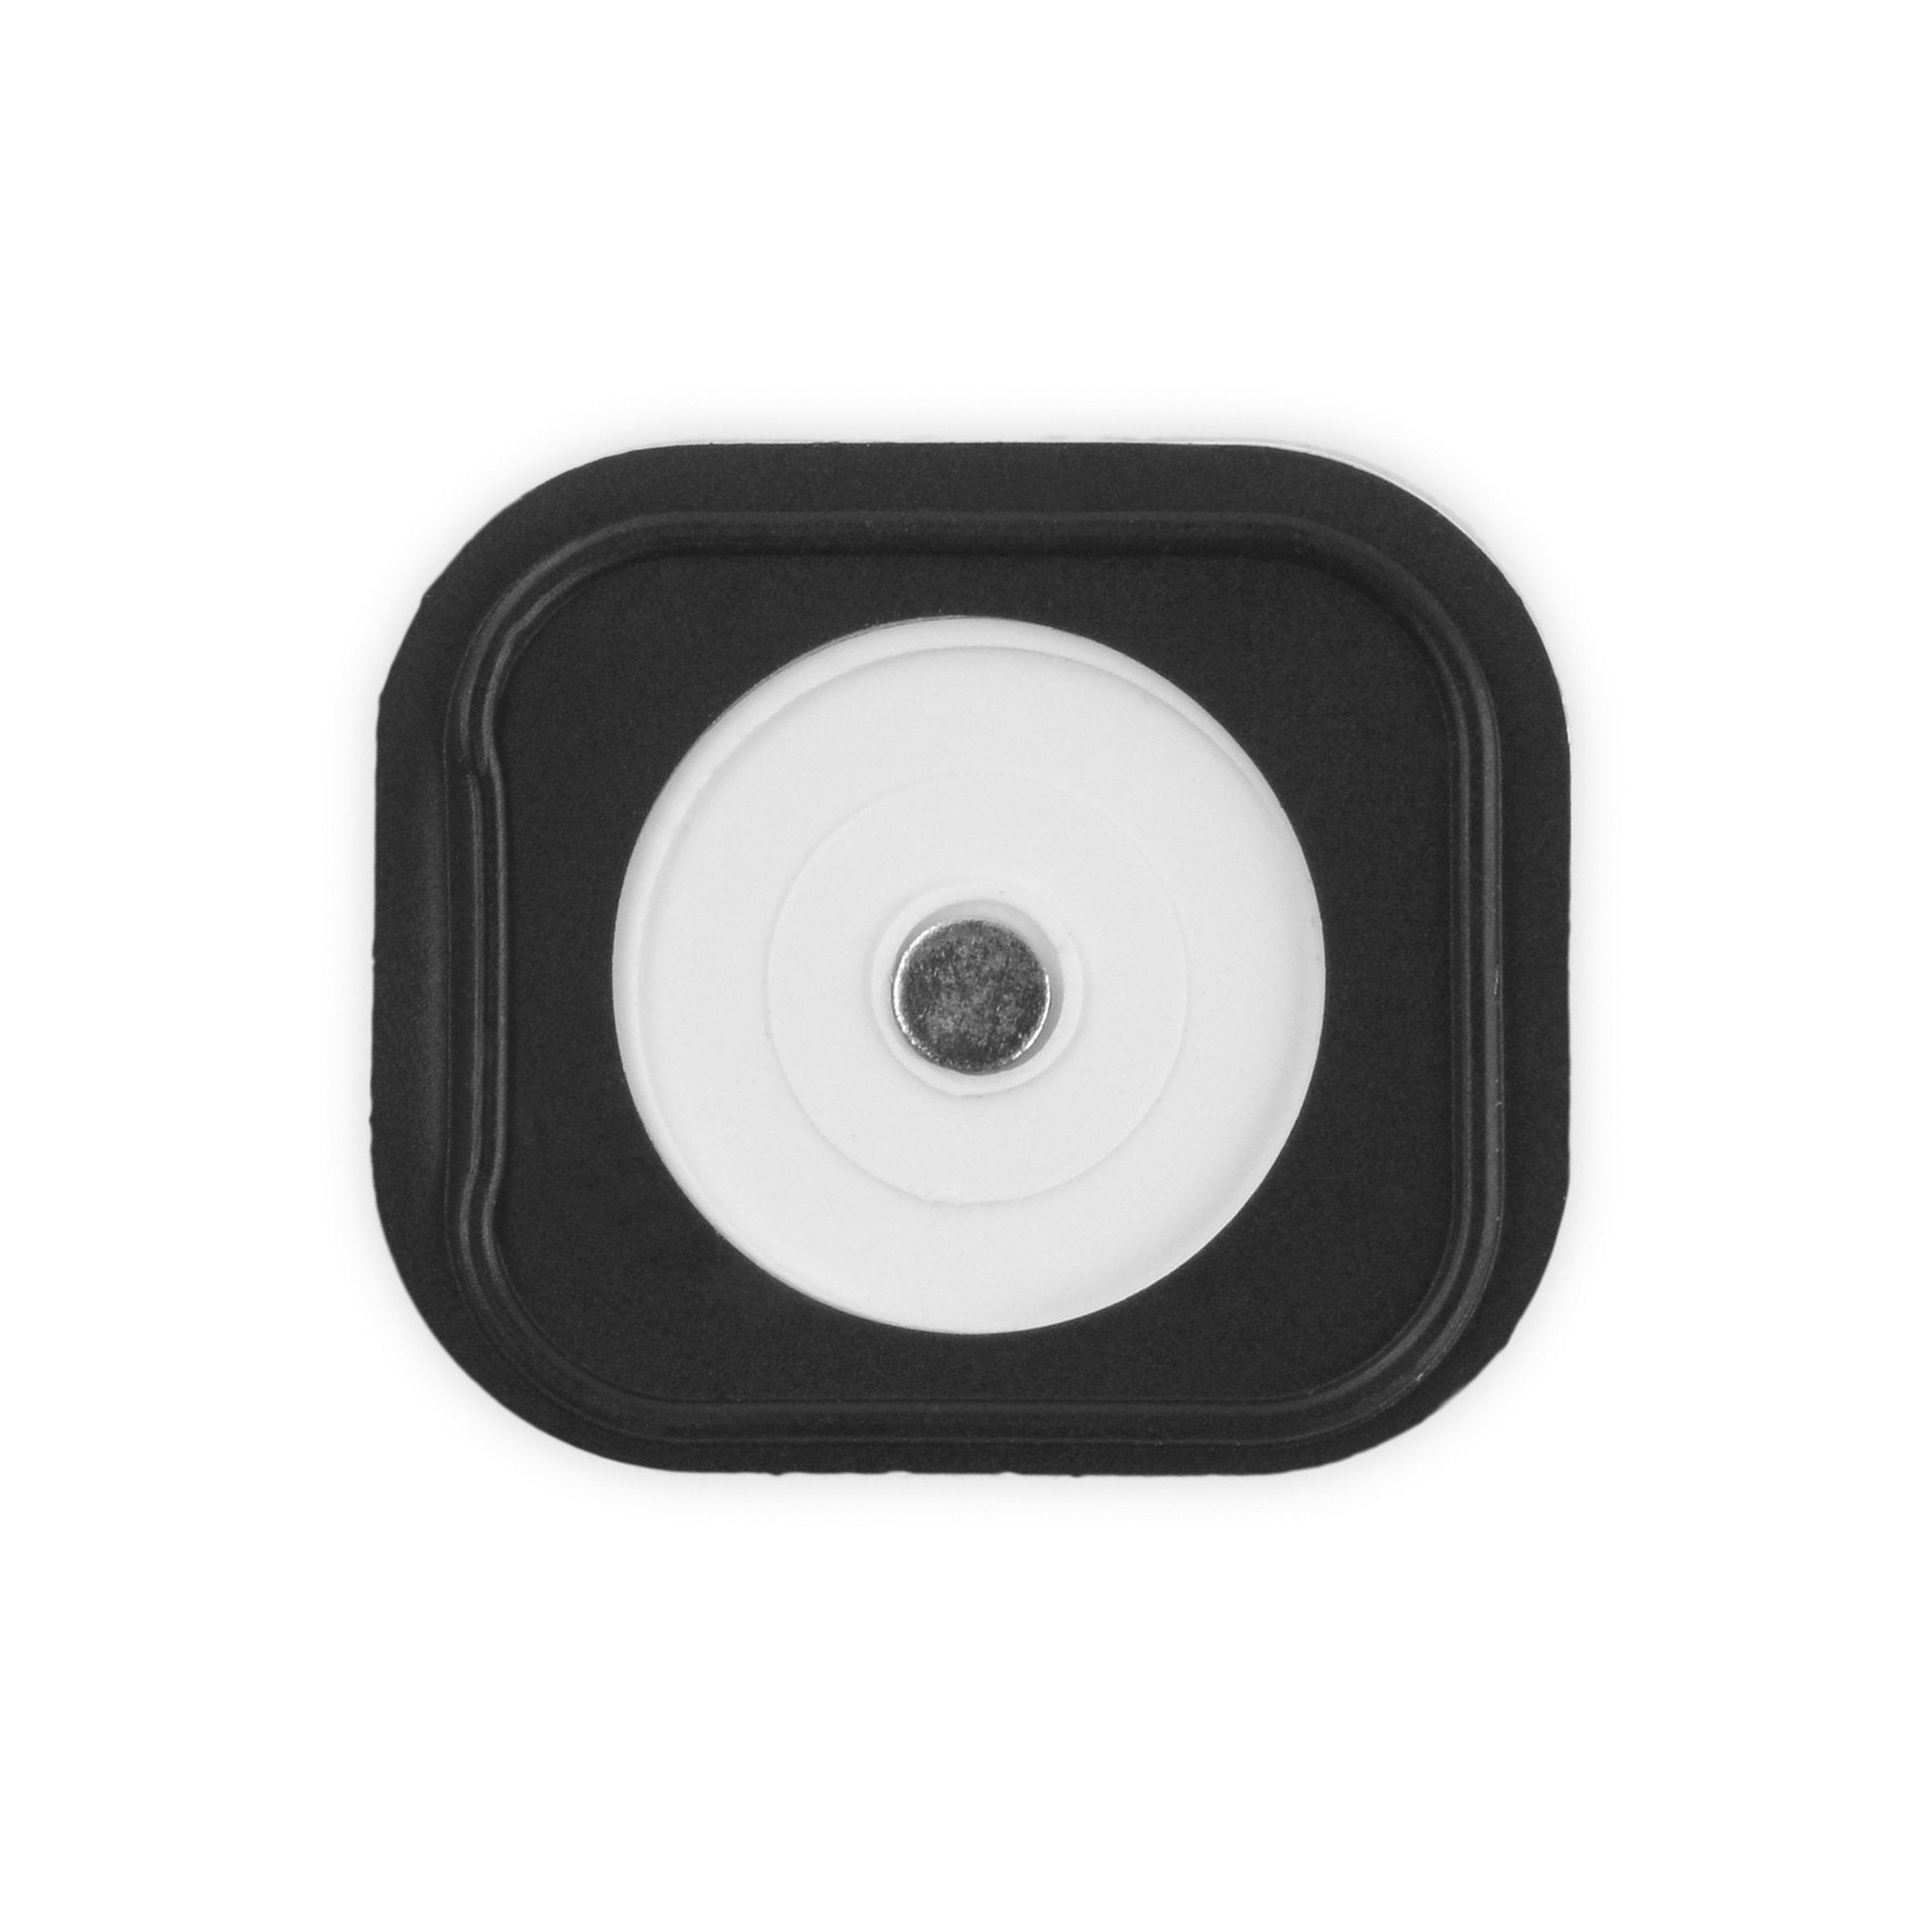 iPhone 5 and 5c Home Button White New Part Only